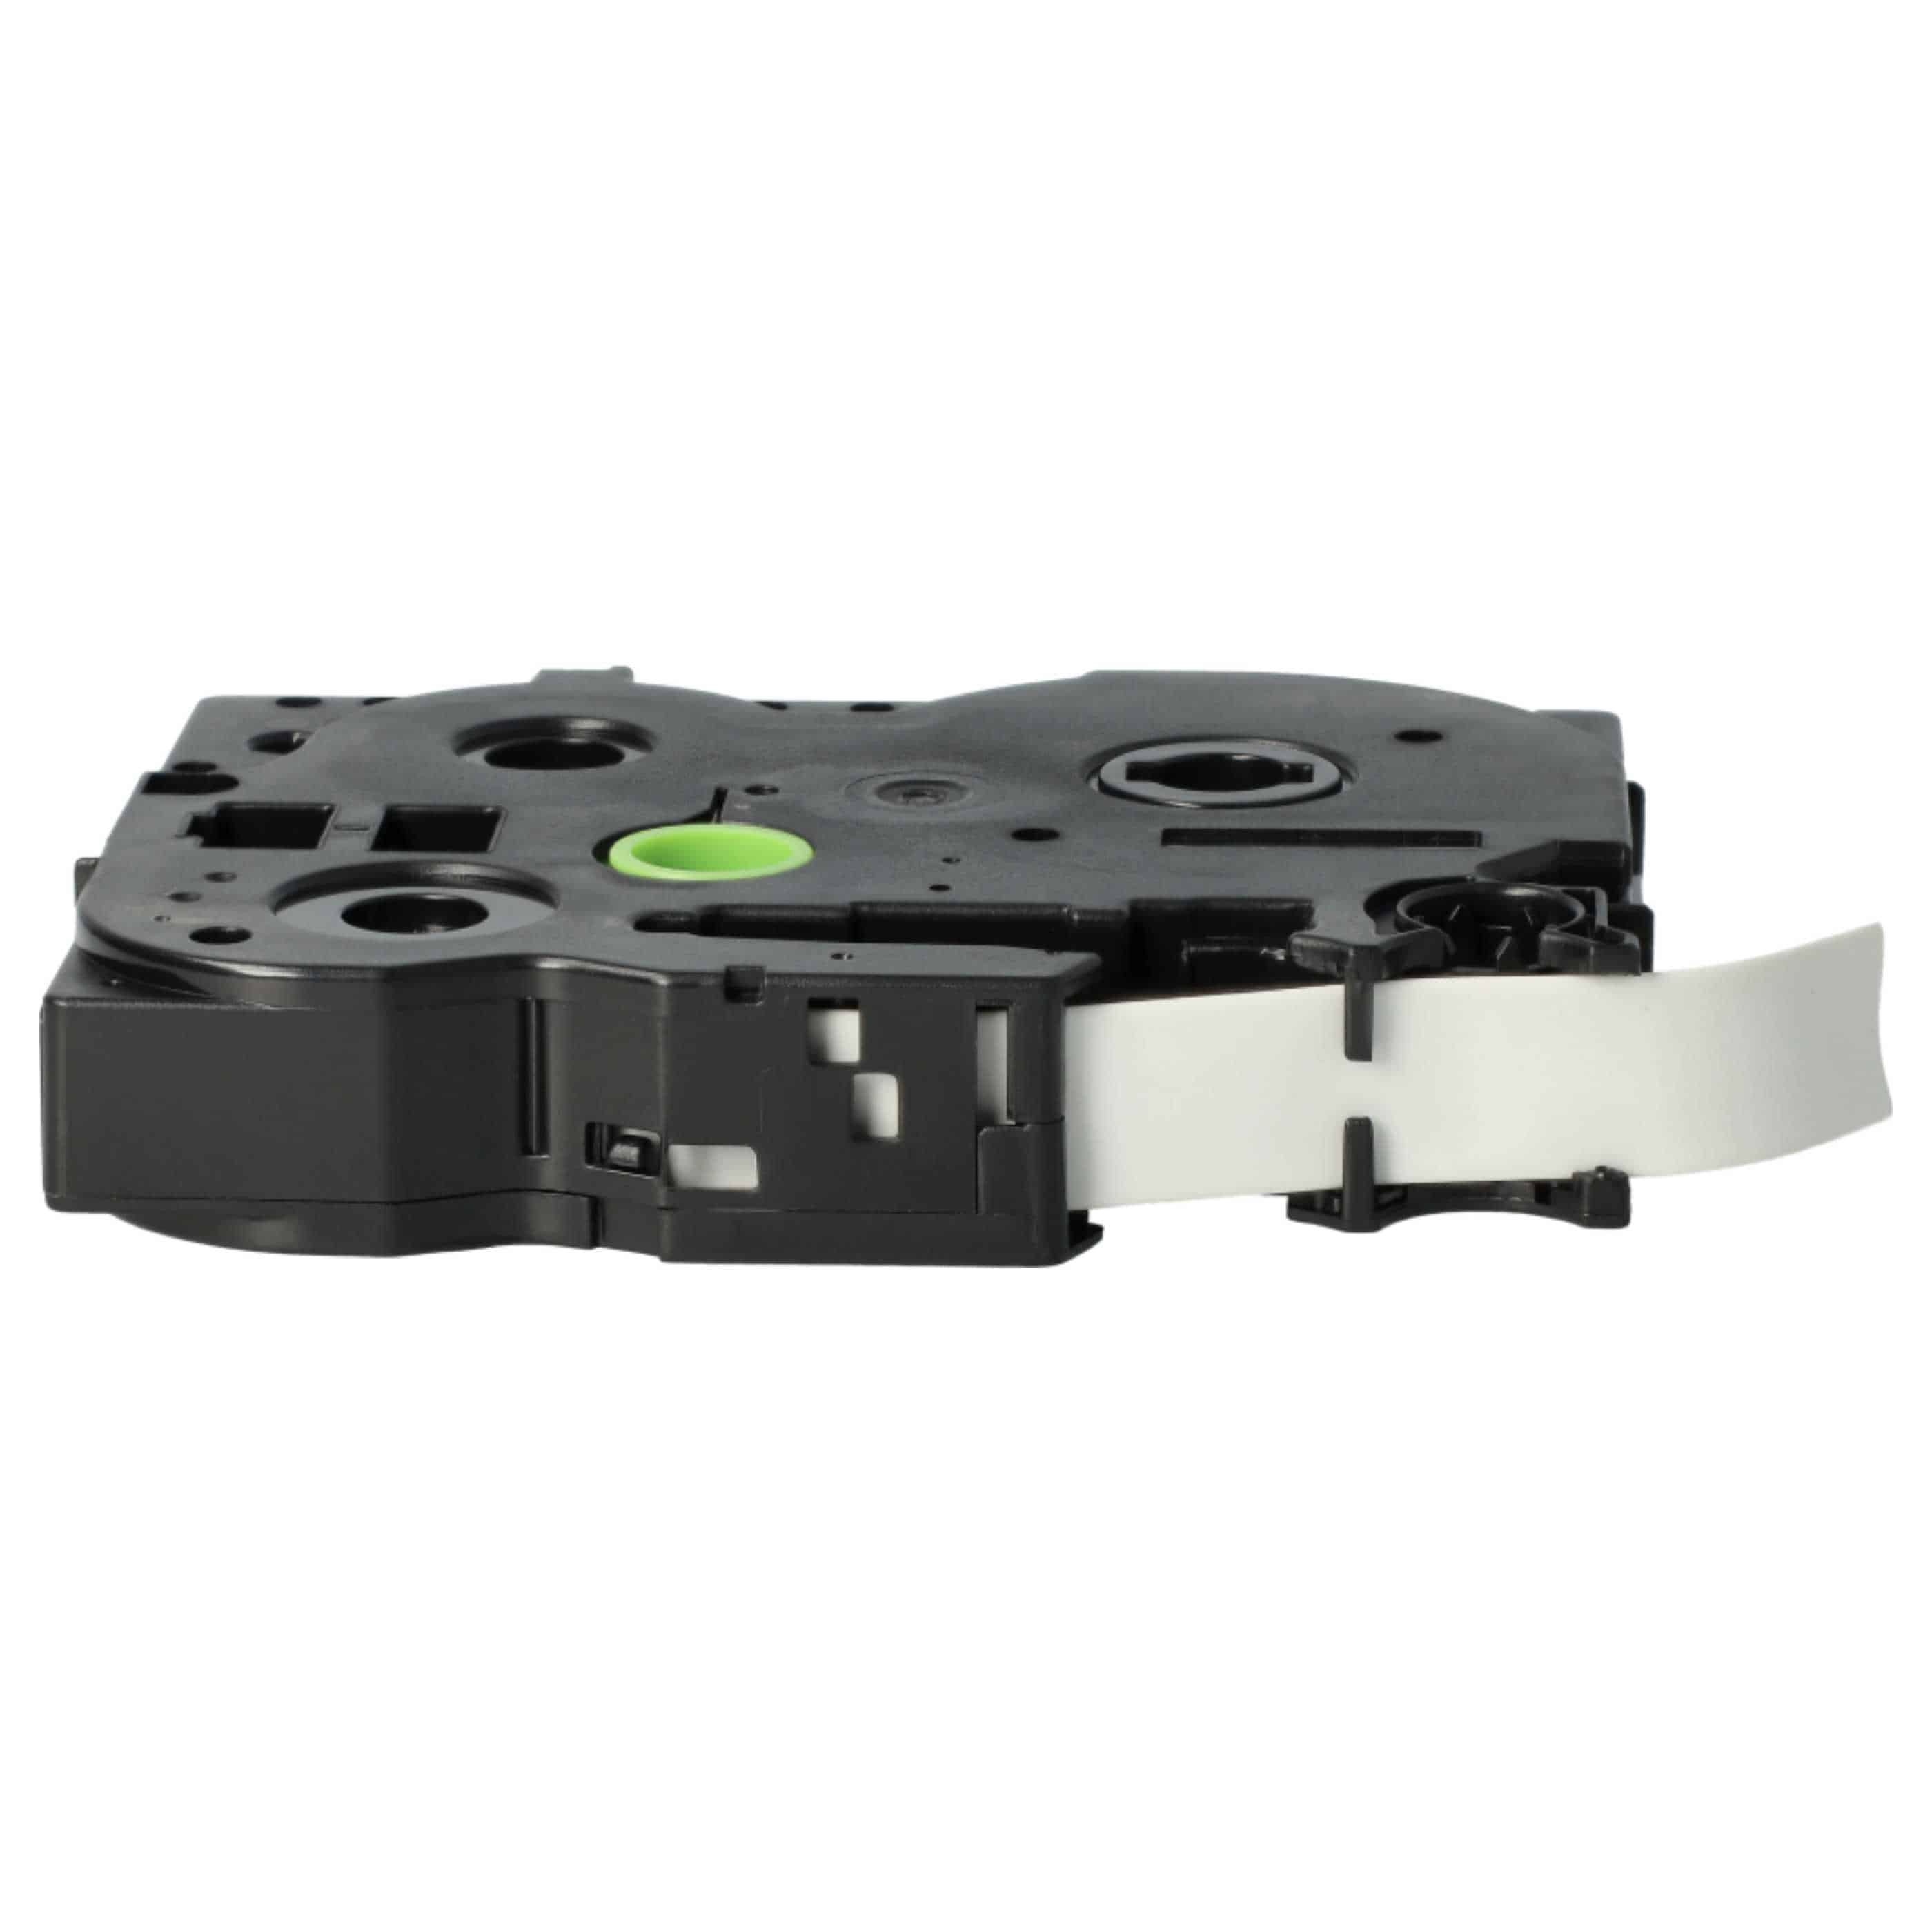 Label Tape as Replacement for Brother AHS-231, HS231 - 11.7 mm Black to White, Heat Shrink Tape, 11.7 mm